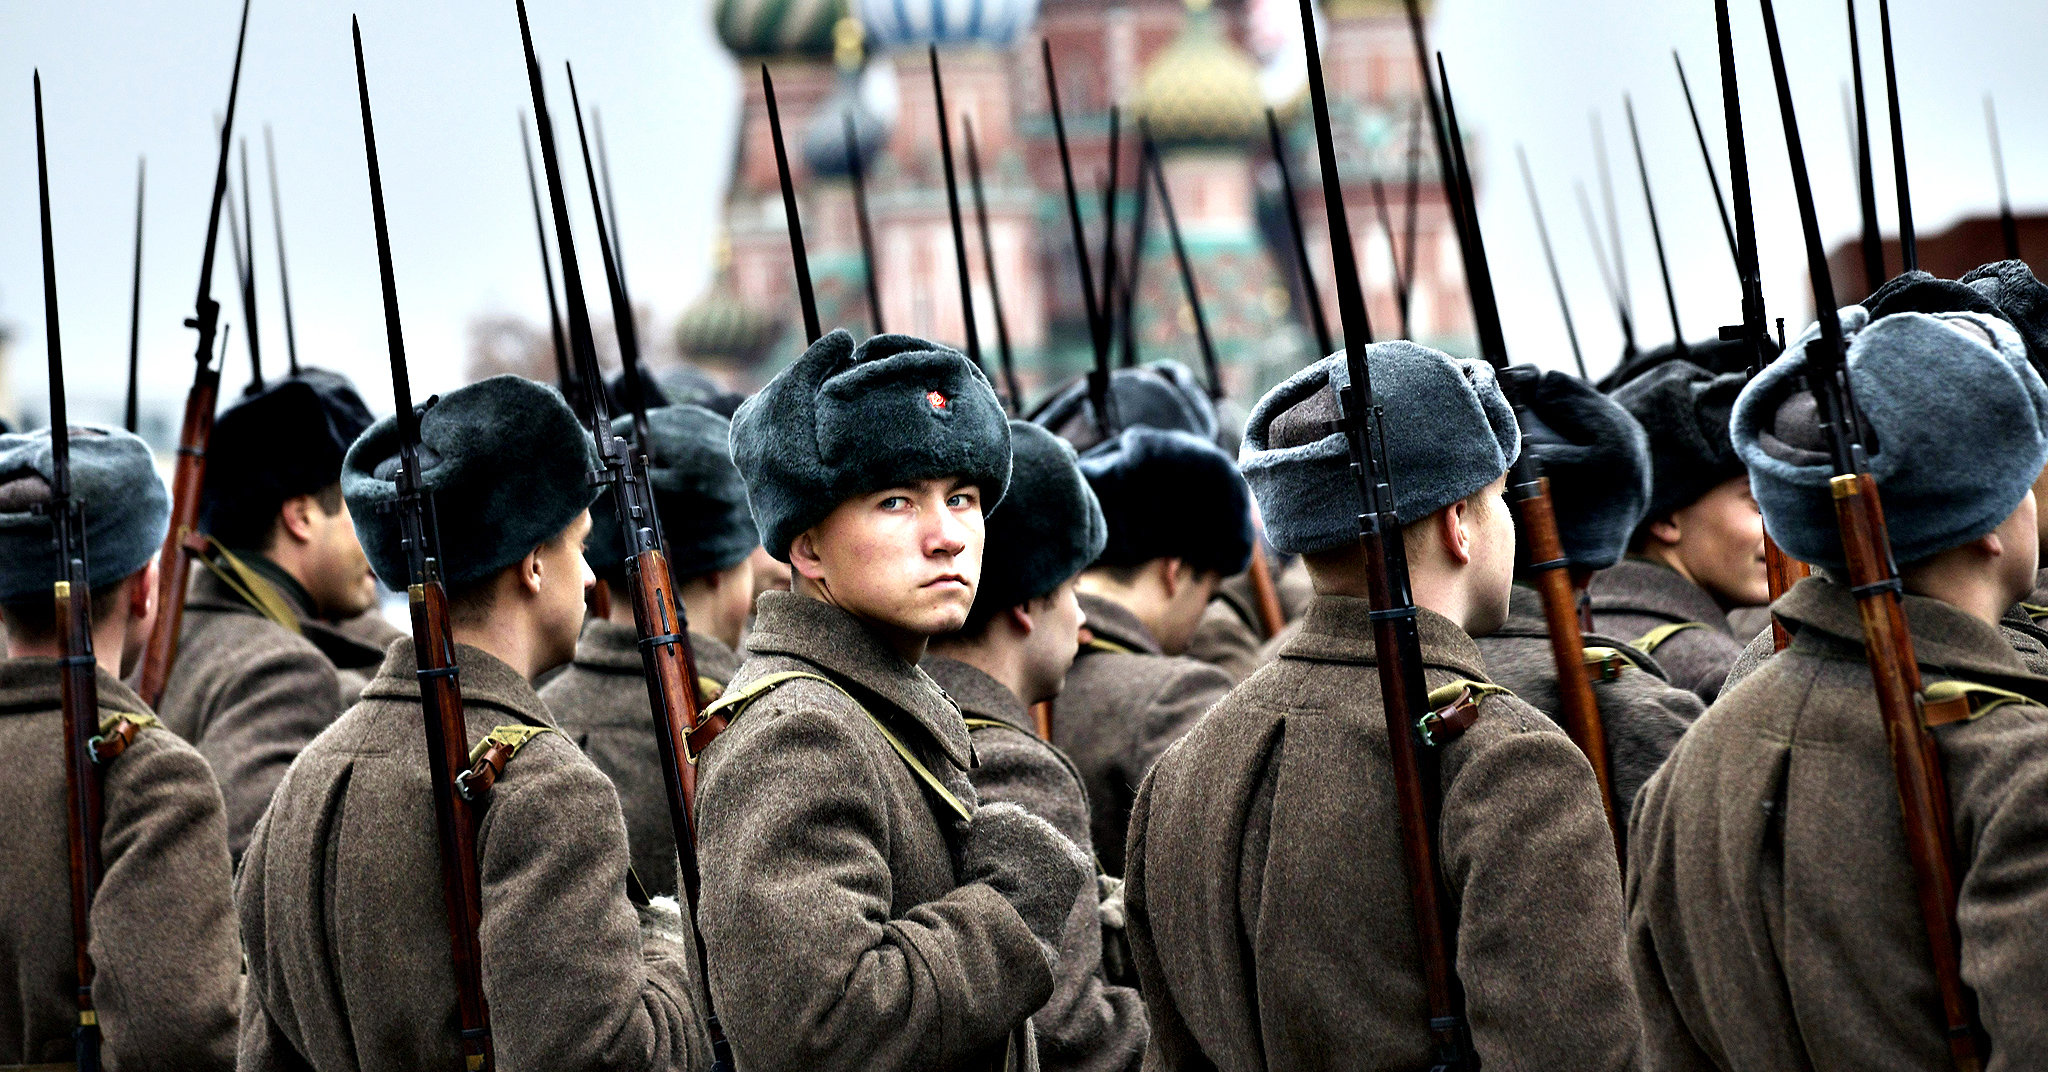 5 more of the biggest blunders in Russian military history